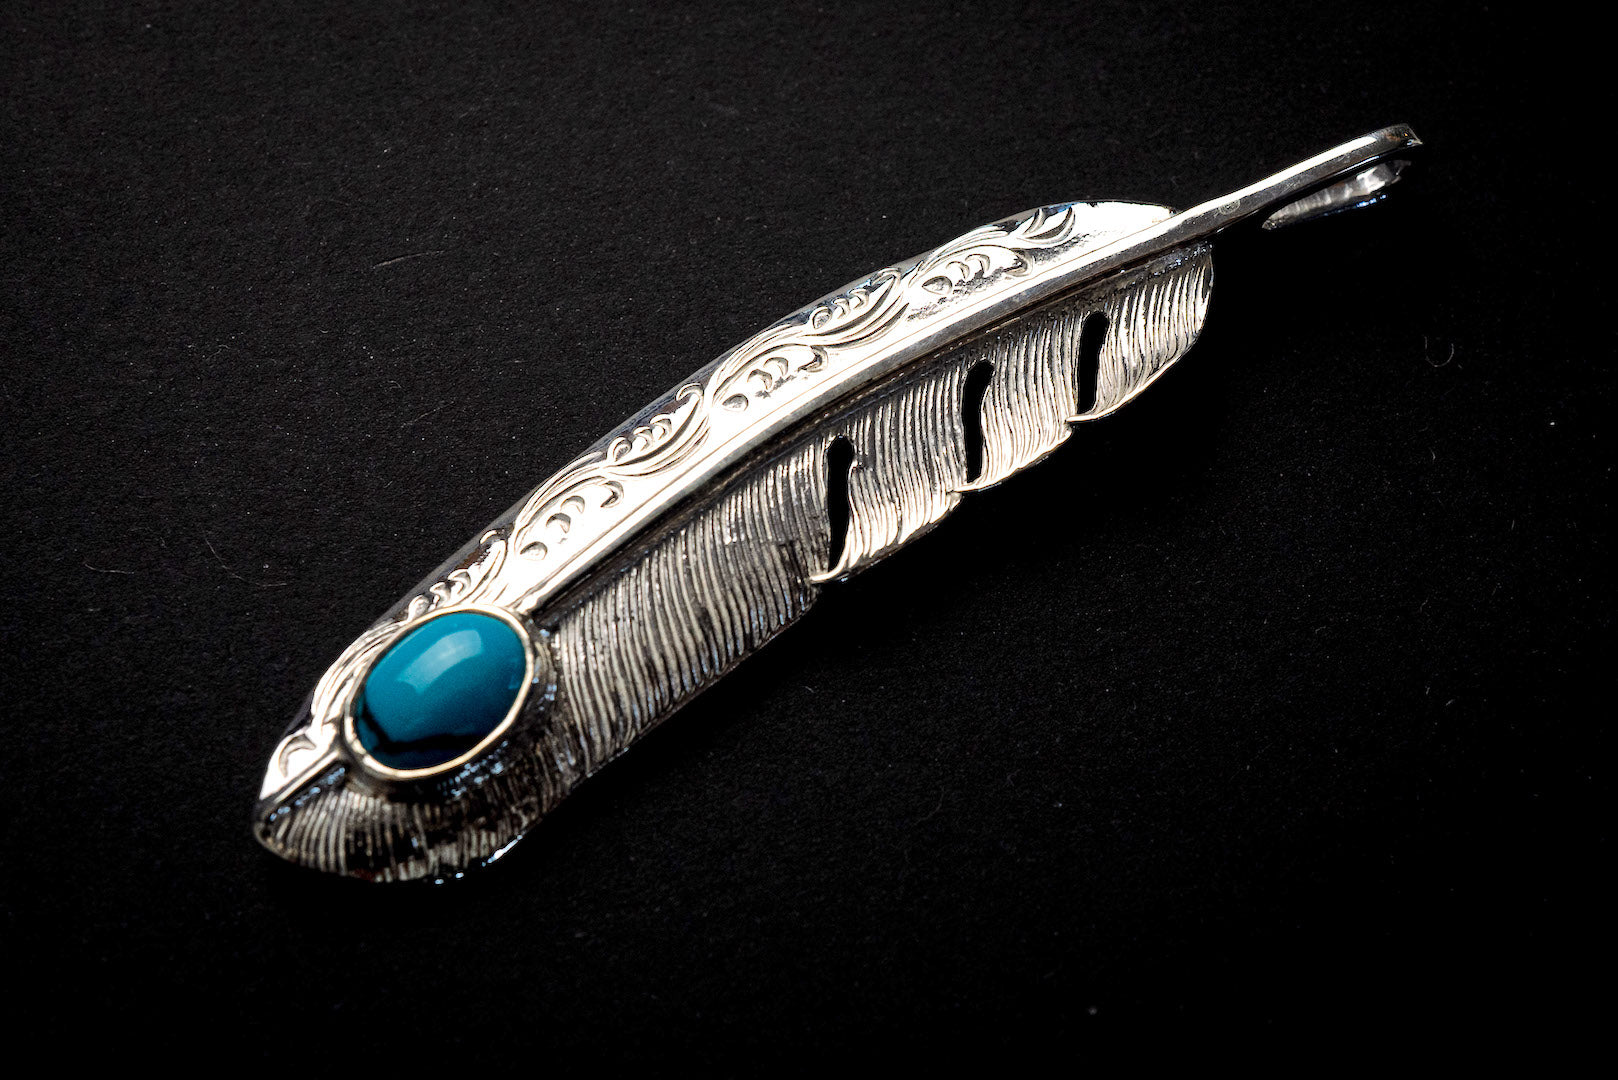 First Arrow's Large "Cloudy" Silver Pendant With Turquoise Limited Edition (CR-003)